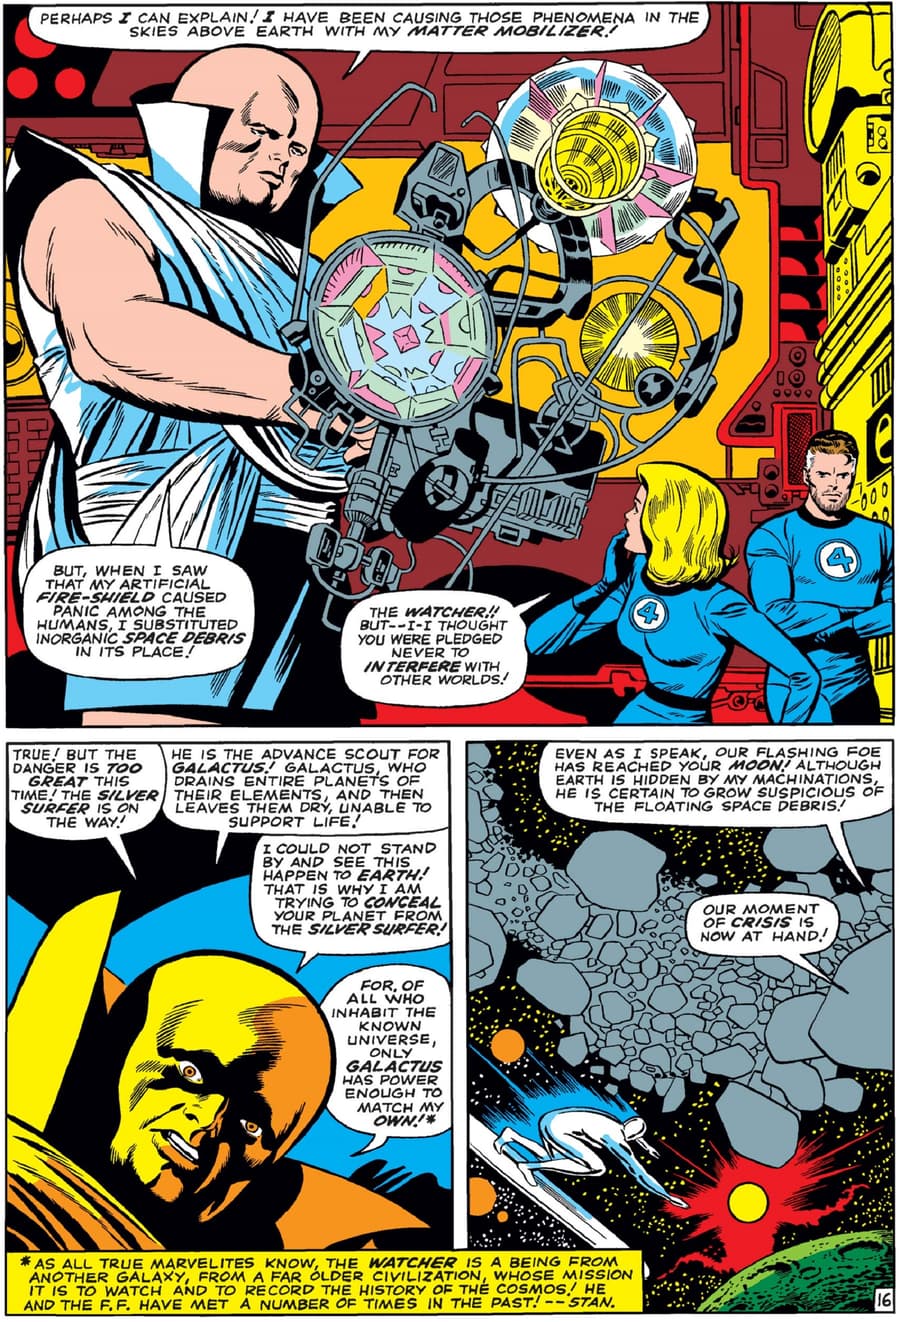 The team faces cosmic stakes in the “Coming of Galactus” arc from FANTASTIC FOUR (1961) #48.